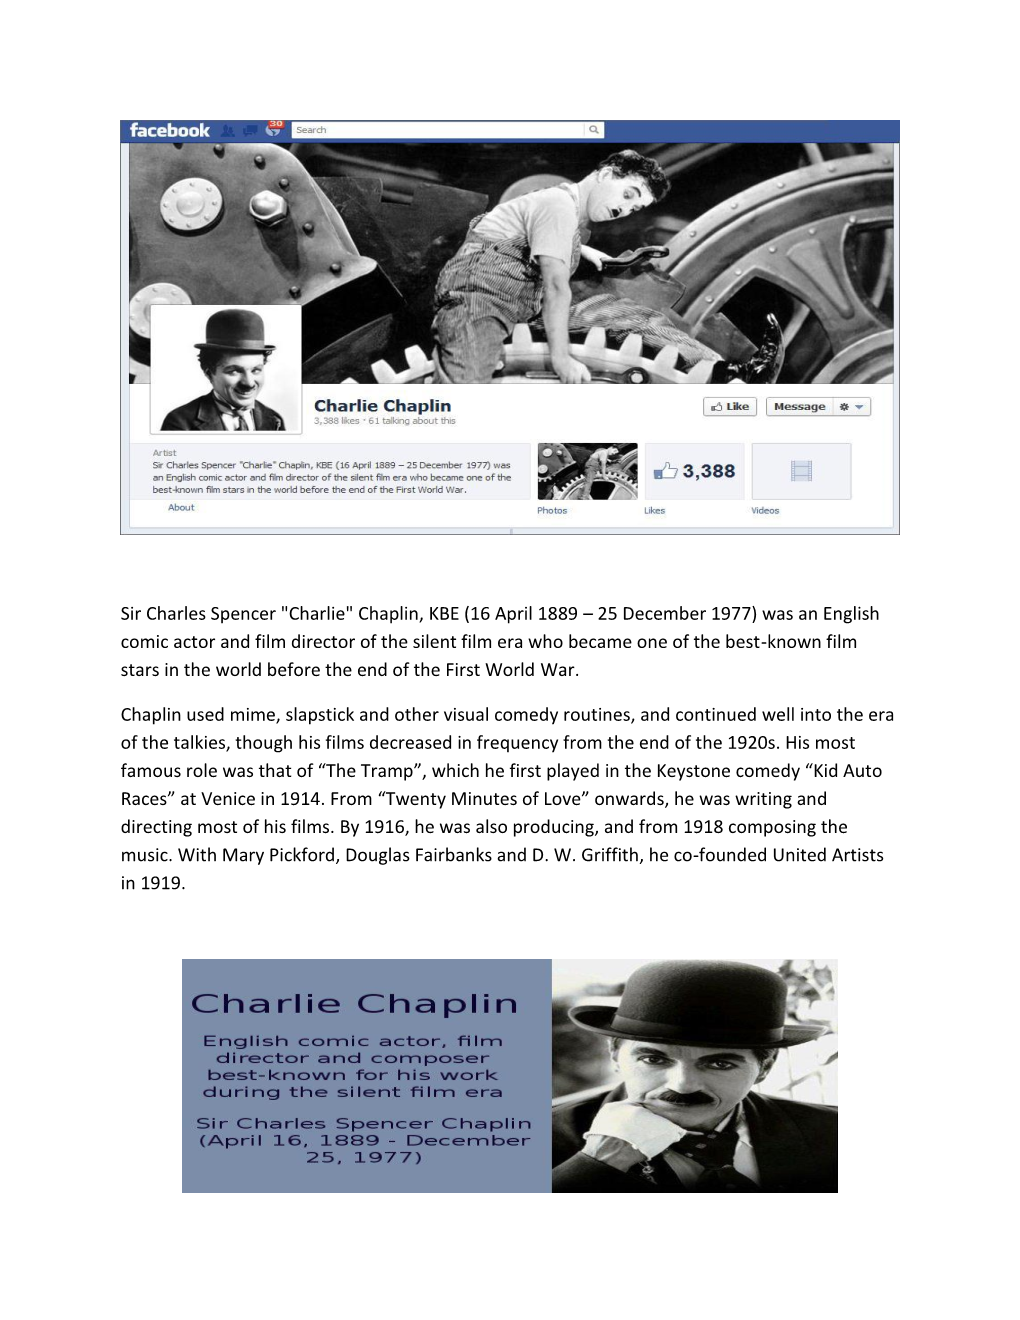 Sir Charles Spencer "Charlie" Chaplin, KBE (16 April 1889 – 25 December 1977) Was an English Comic Actor and Film Di